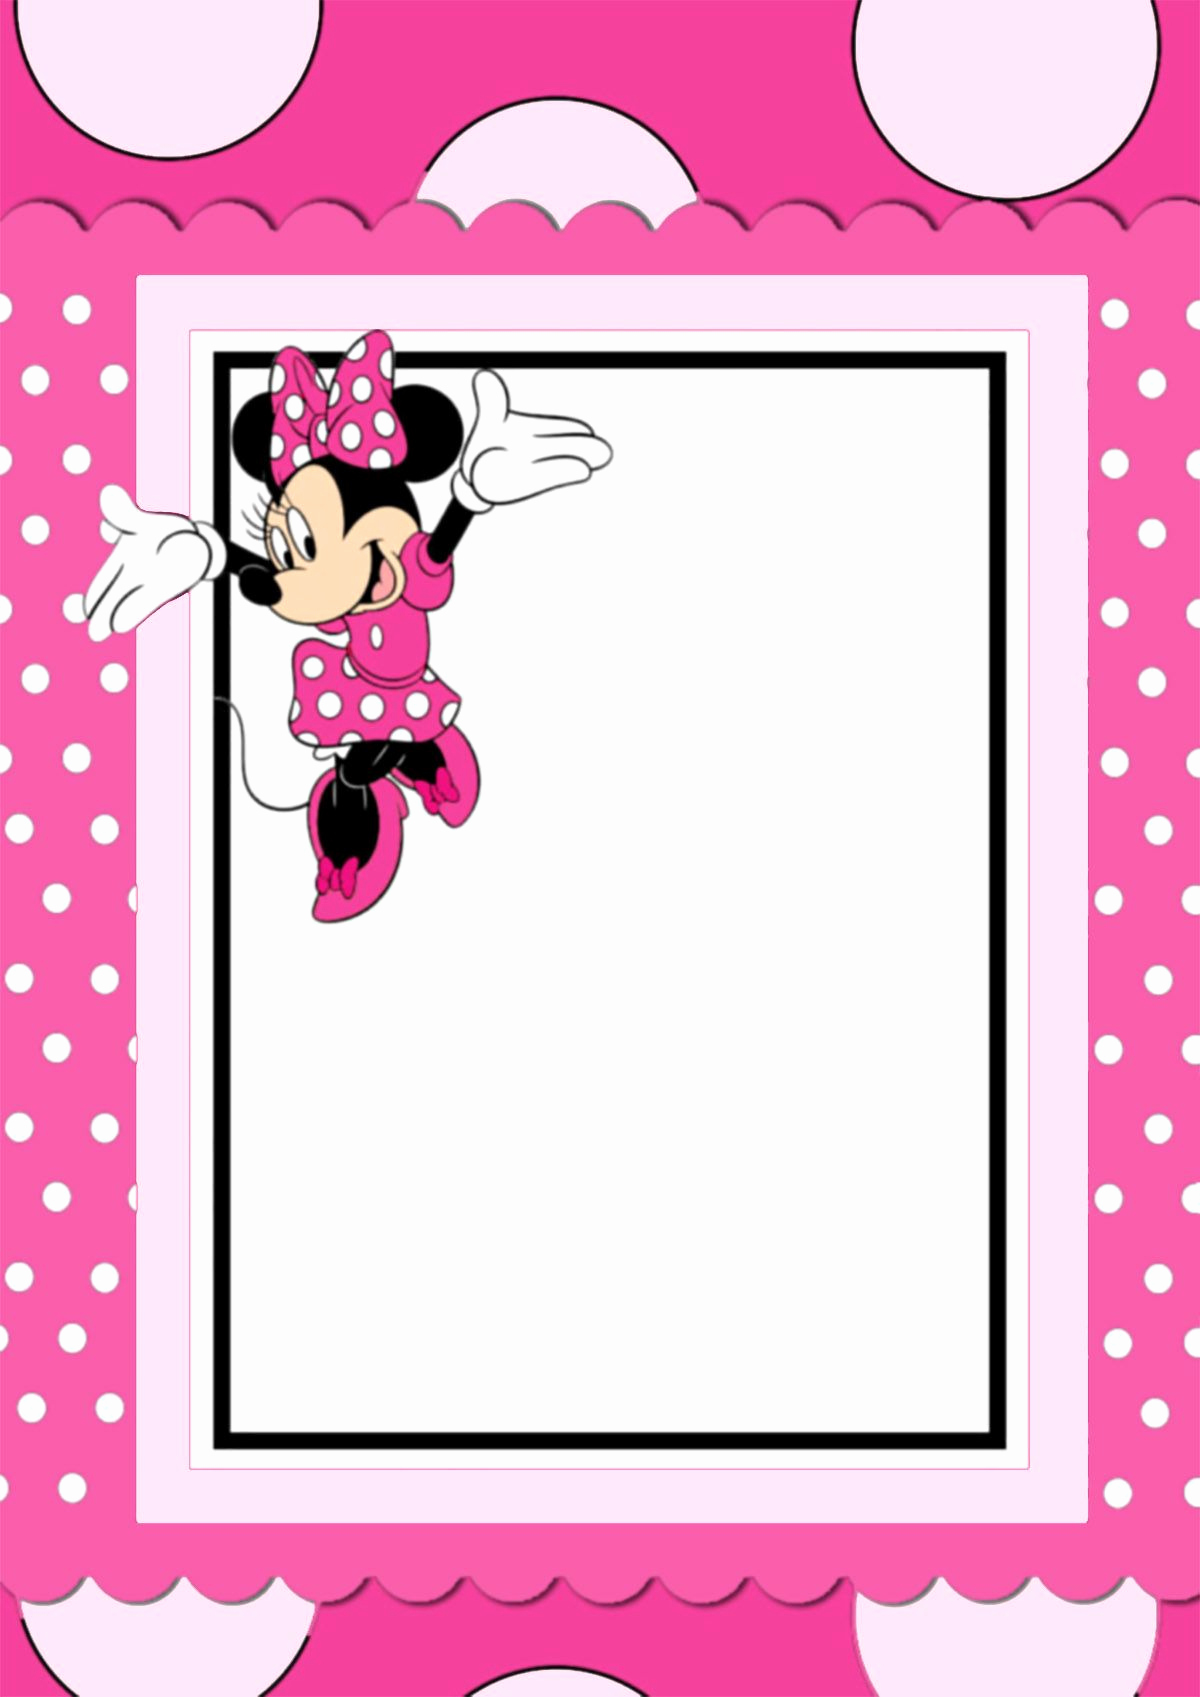 Free Minnie Mouse Invitation Template New Free Printable Minnie Mouse Invitation Card